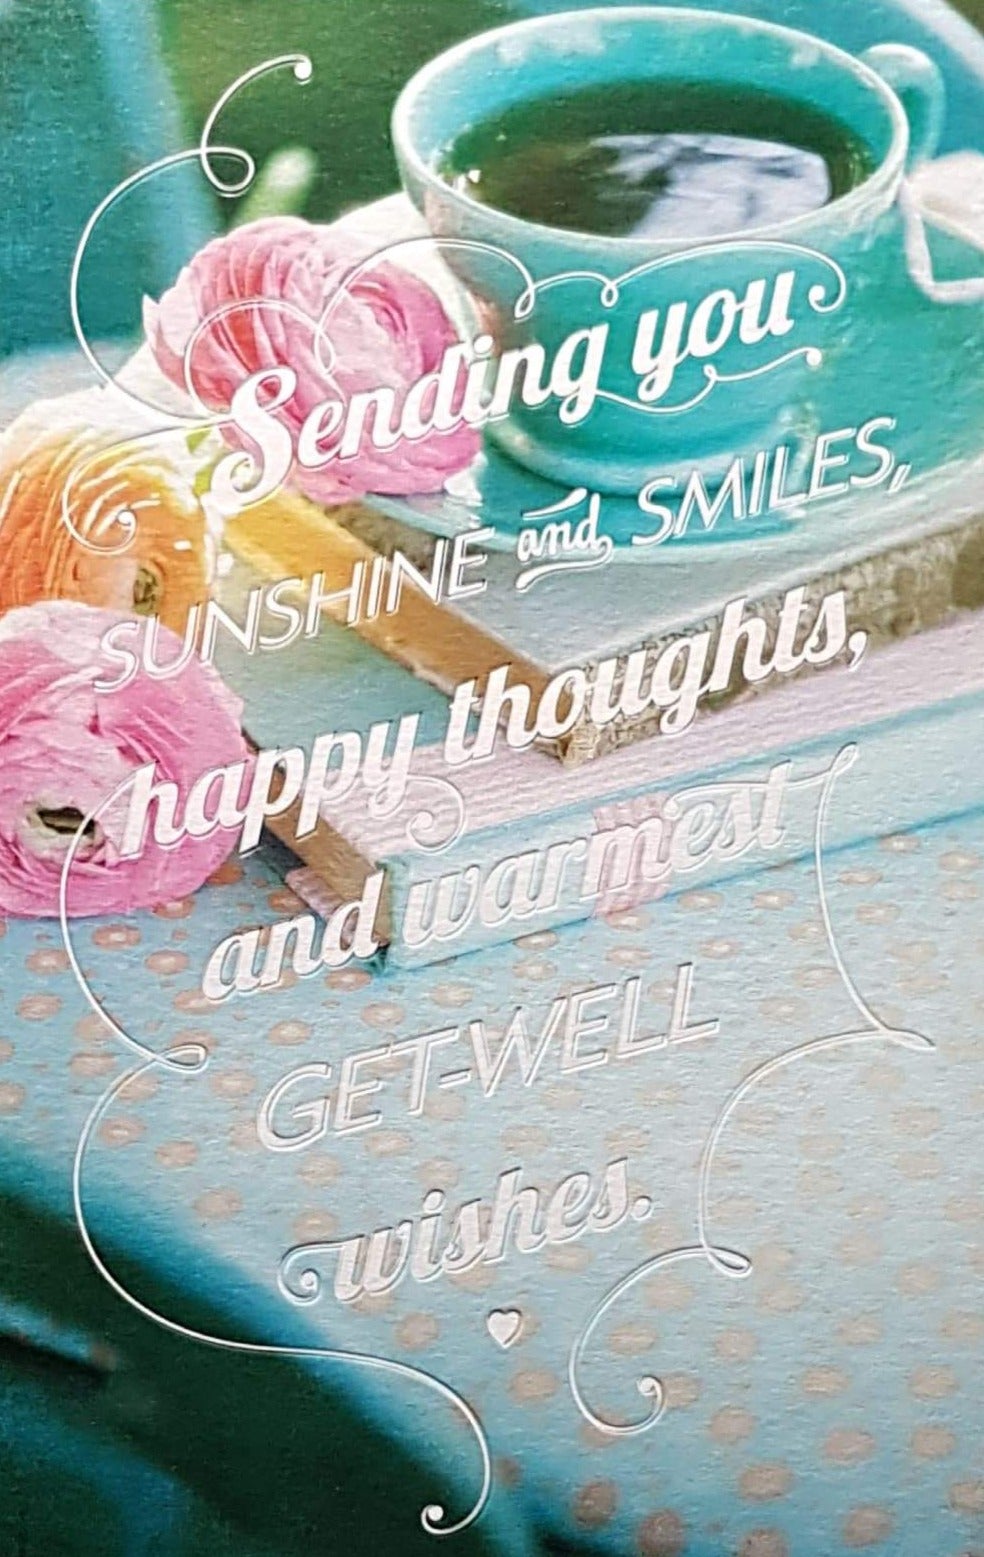 Get Well Card - Happy Thoughts